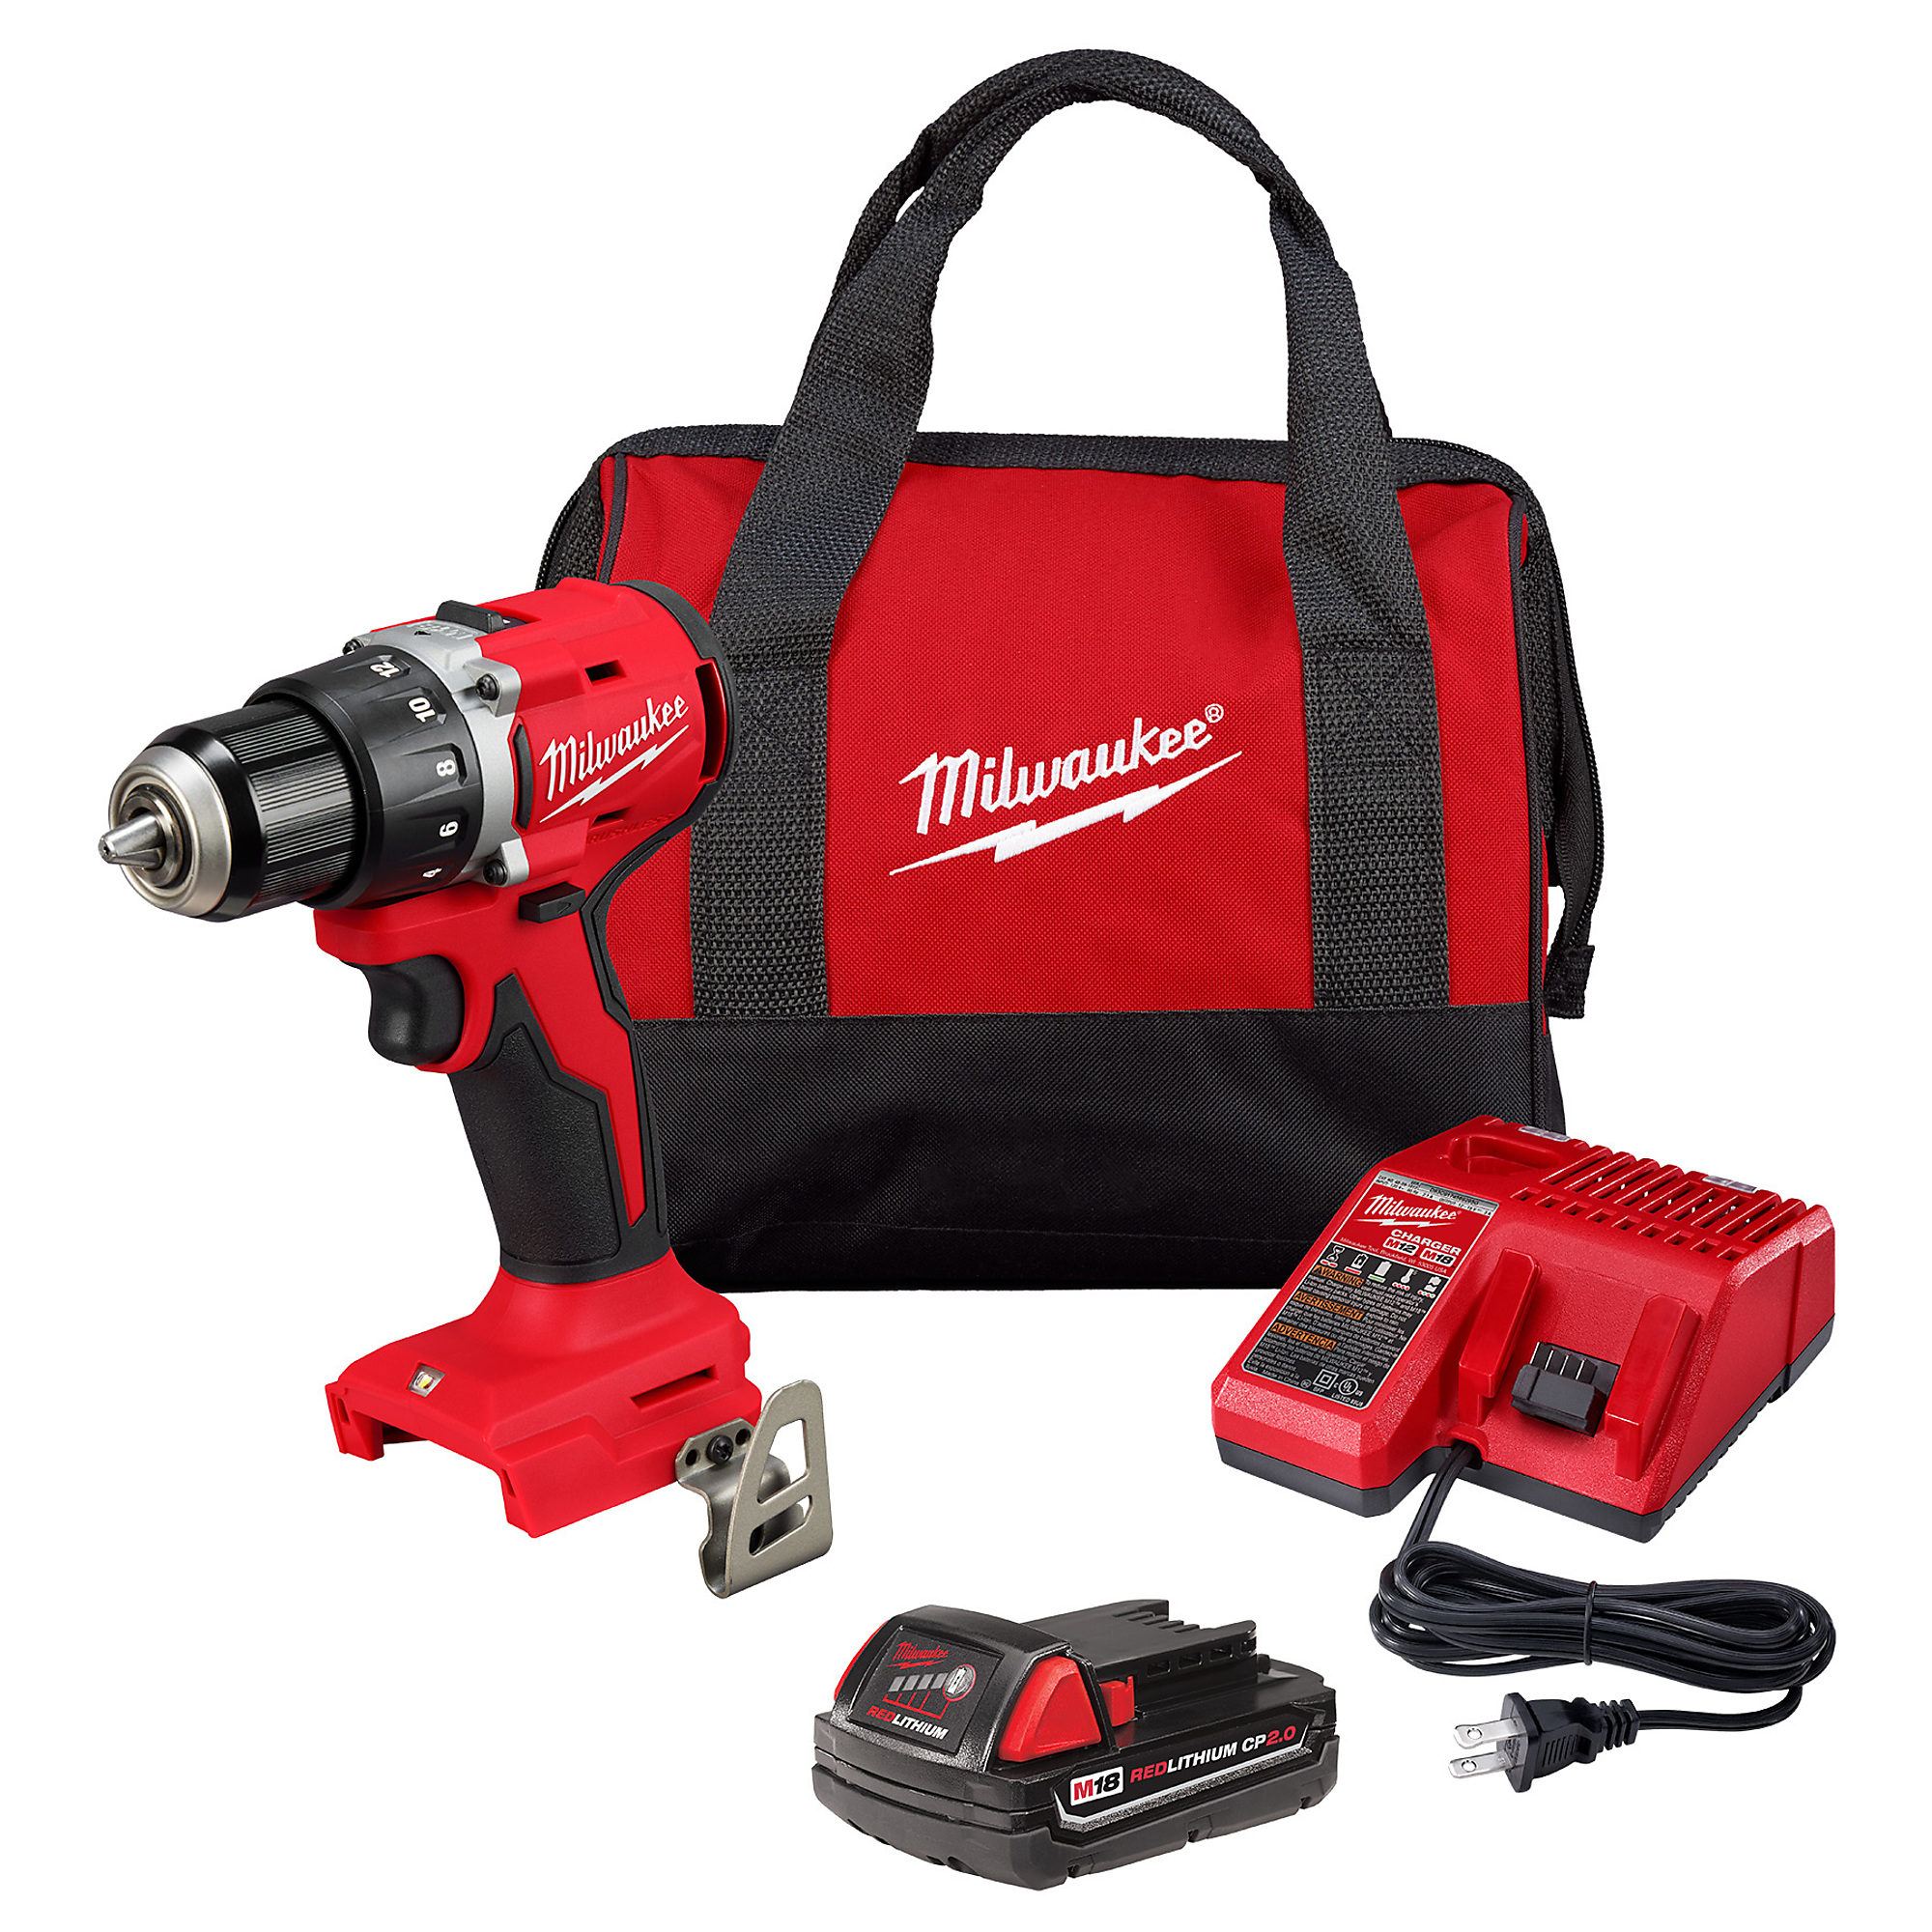 Milwaukee, M18 Compact Brushless 1/2Inch Drill/Driver Kit, Chuck Size 1/2 in, Max. Torque 550 ft-lbs., Max. Speed 1700 rpm, Model 3601-21P